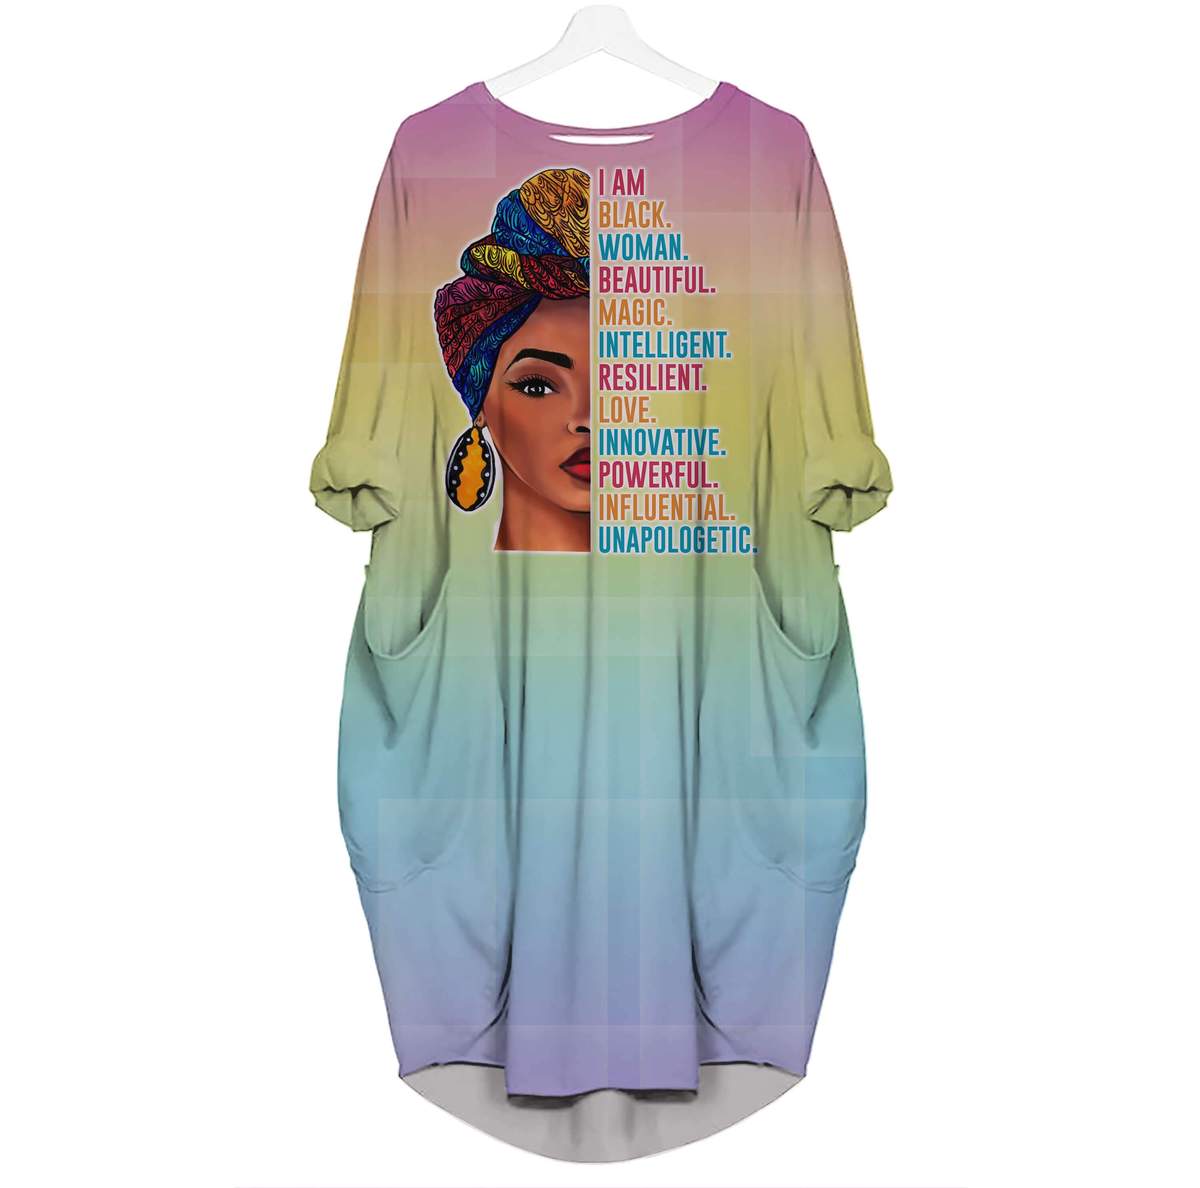 Juneteenth Is Just A Month Away! Check Out The Must-Have Merch You'll Want To Buy